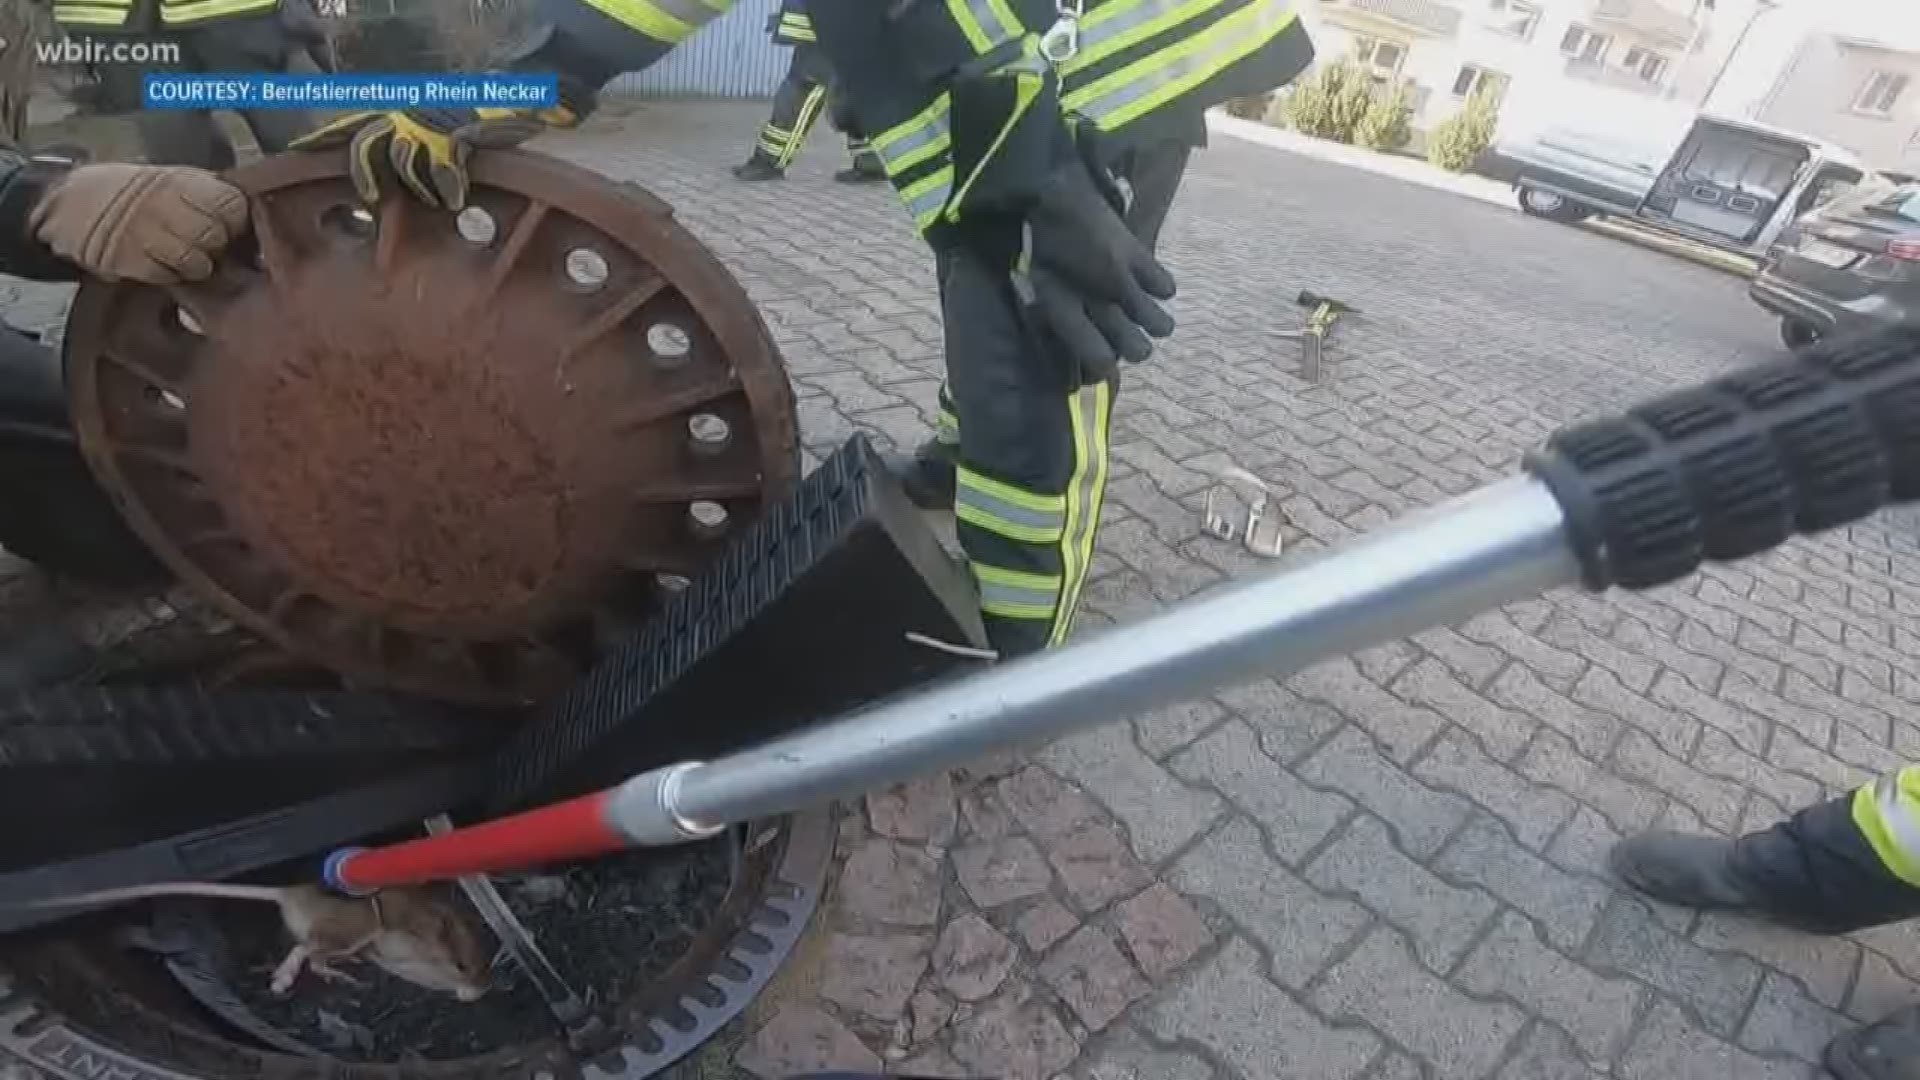 Many people wouldn't think twice about running away from a sewer rat -- but a group of first responders from Germany believe every life is worth saving.